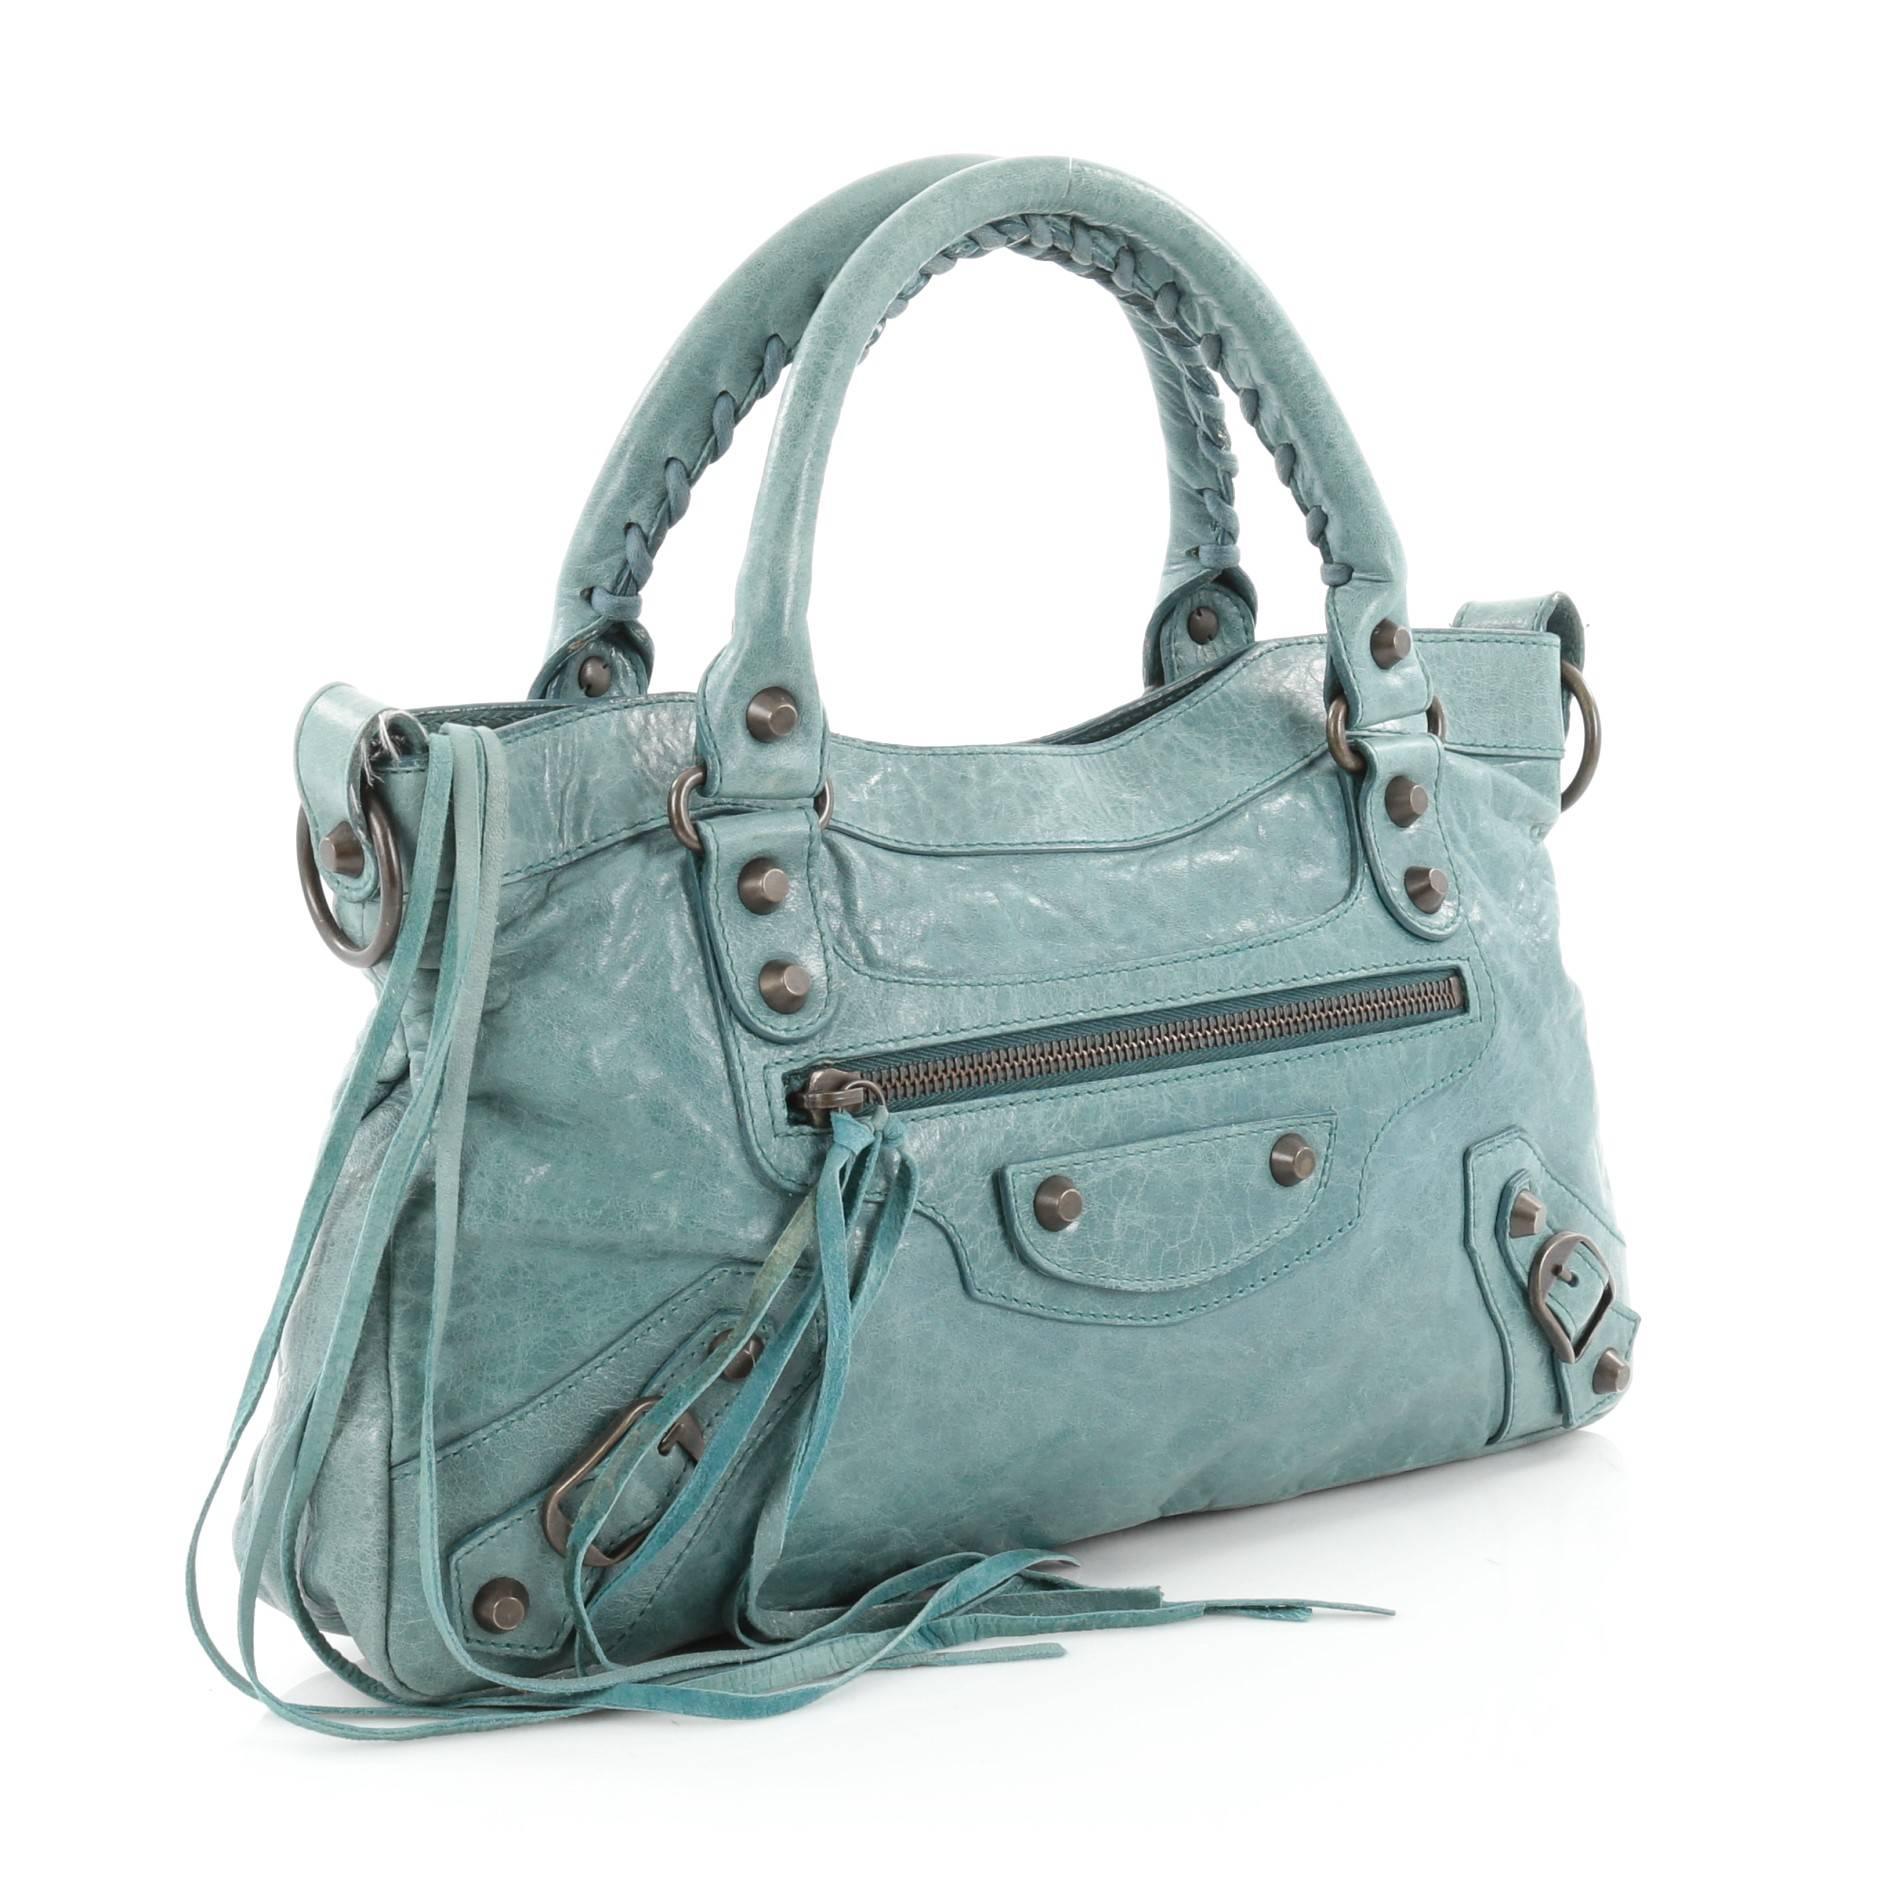 This authentic Balenciaga First Covered Classic Studs Handbag Leather is an easy-to-carry accessory that can be paired with any outfit. Constructed from light turquoise leather, this everyday bag features braided woven handles, long fringe